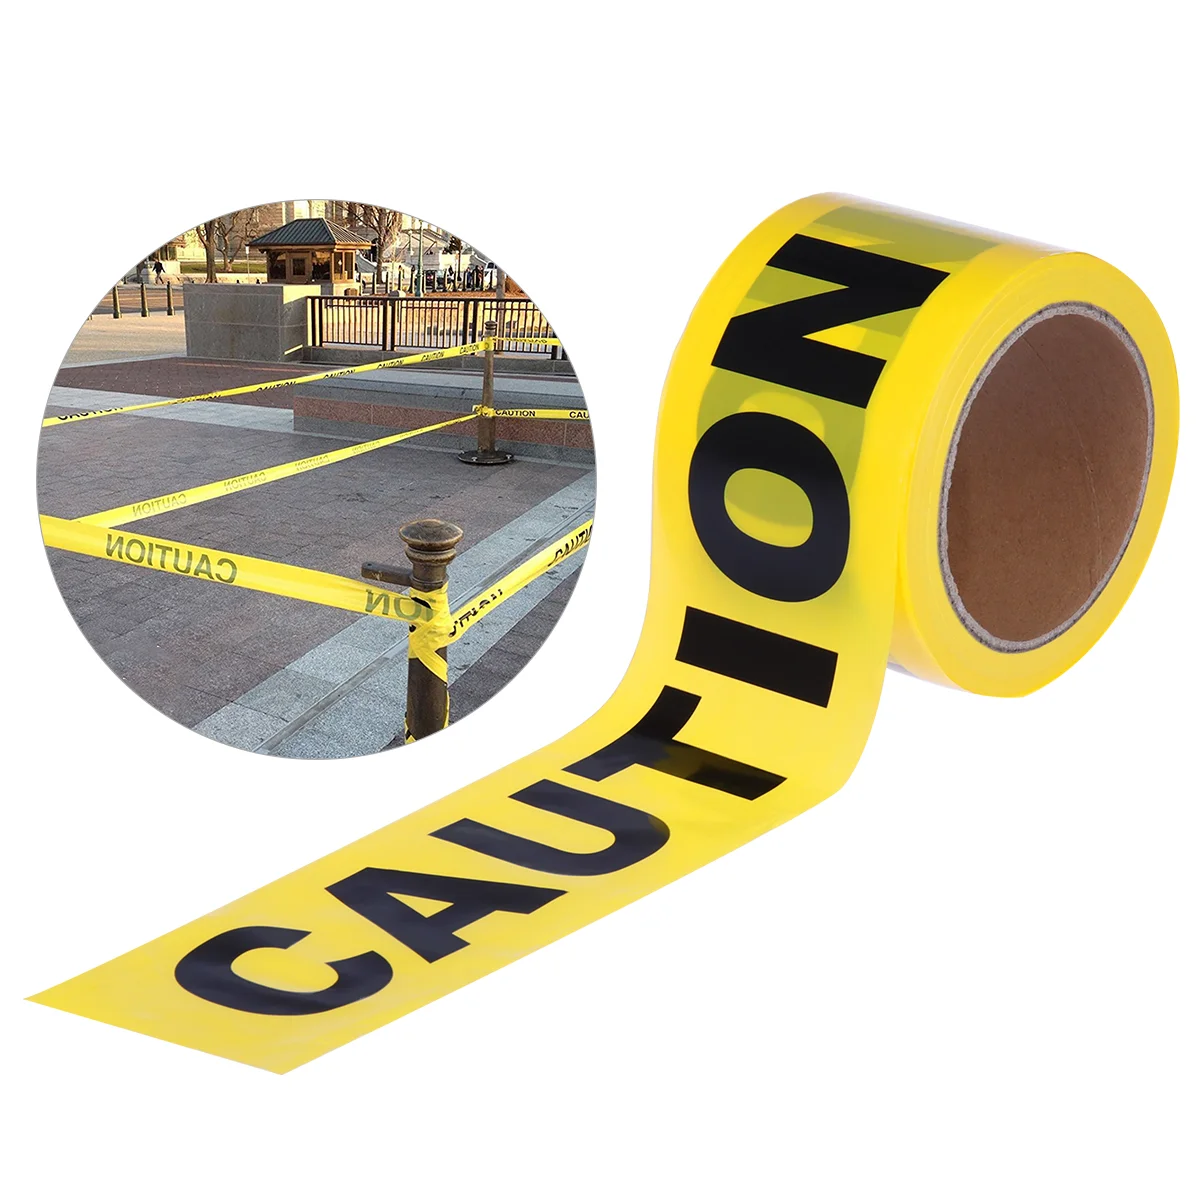 

UEETEK 100M Barricade Caution Tape Warning Tape for Law Enforcement Construction Public Works Safety Crime scene